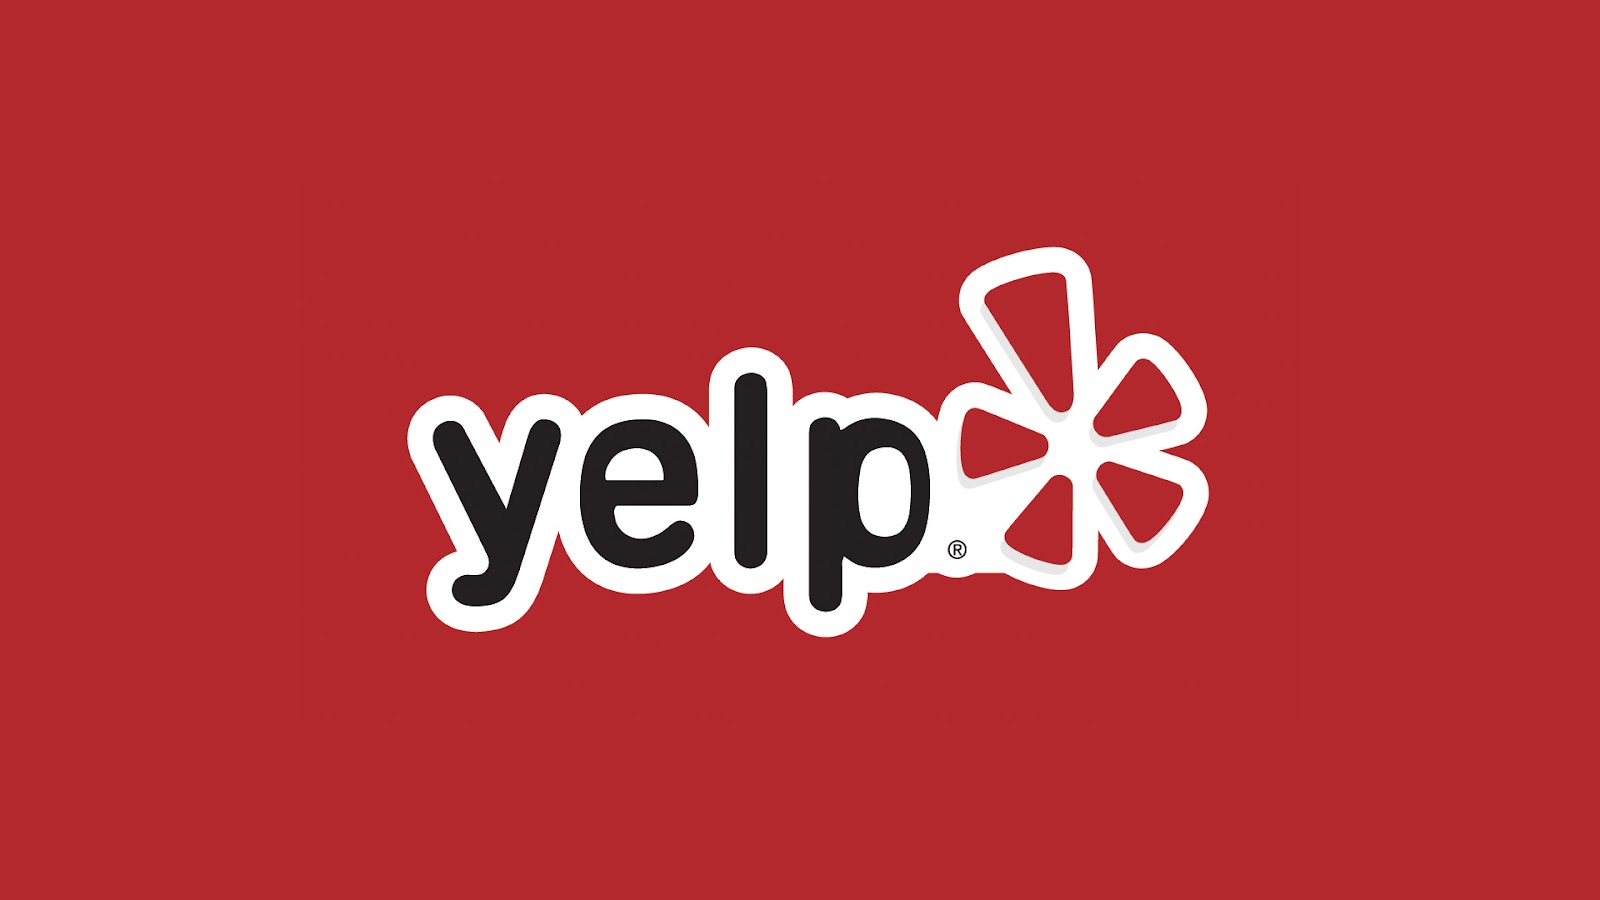 5 Yelp Facts Business Owners Should Know (But Most Don't)